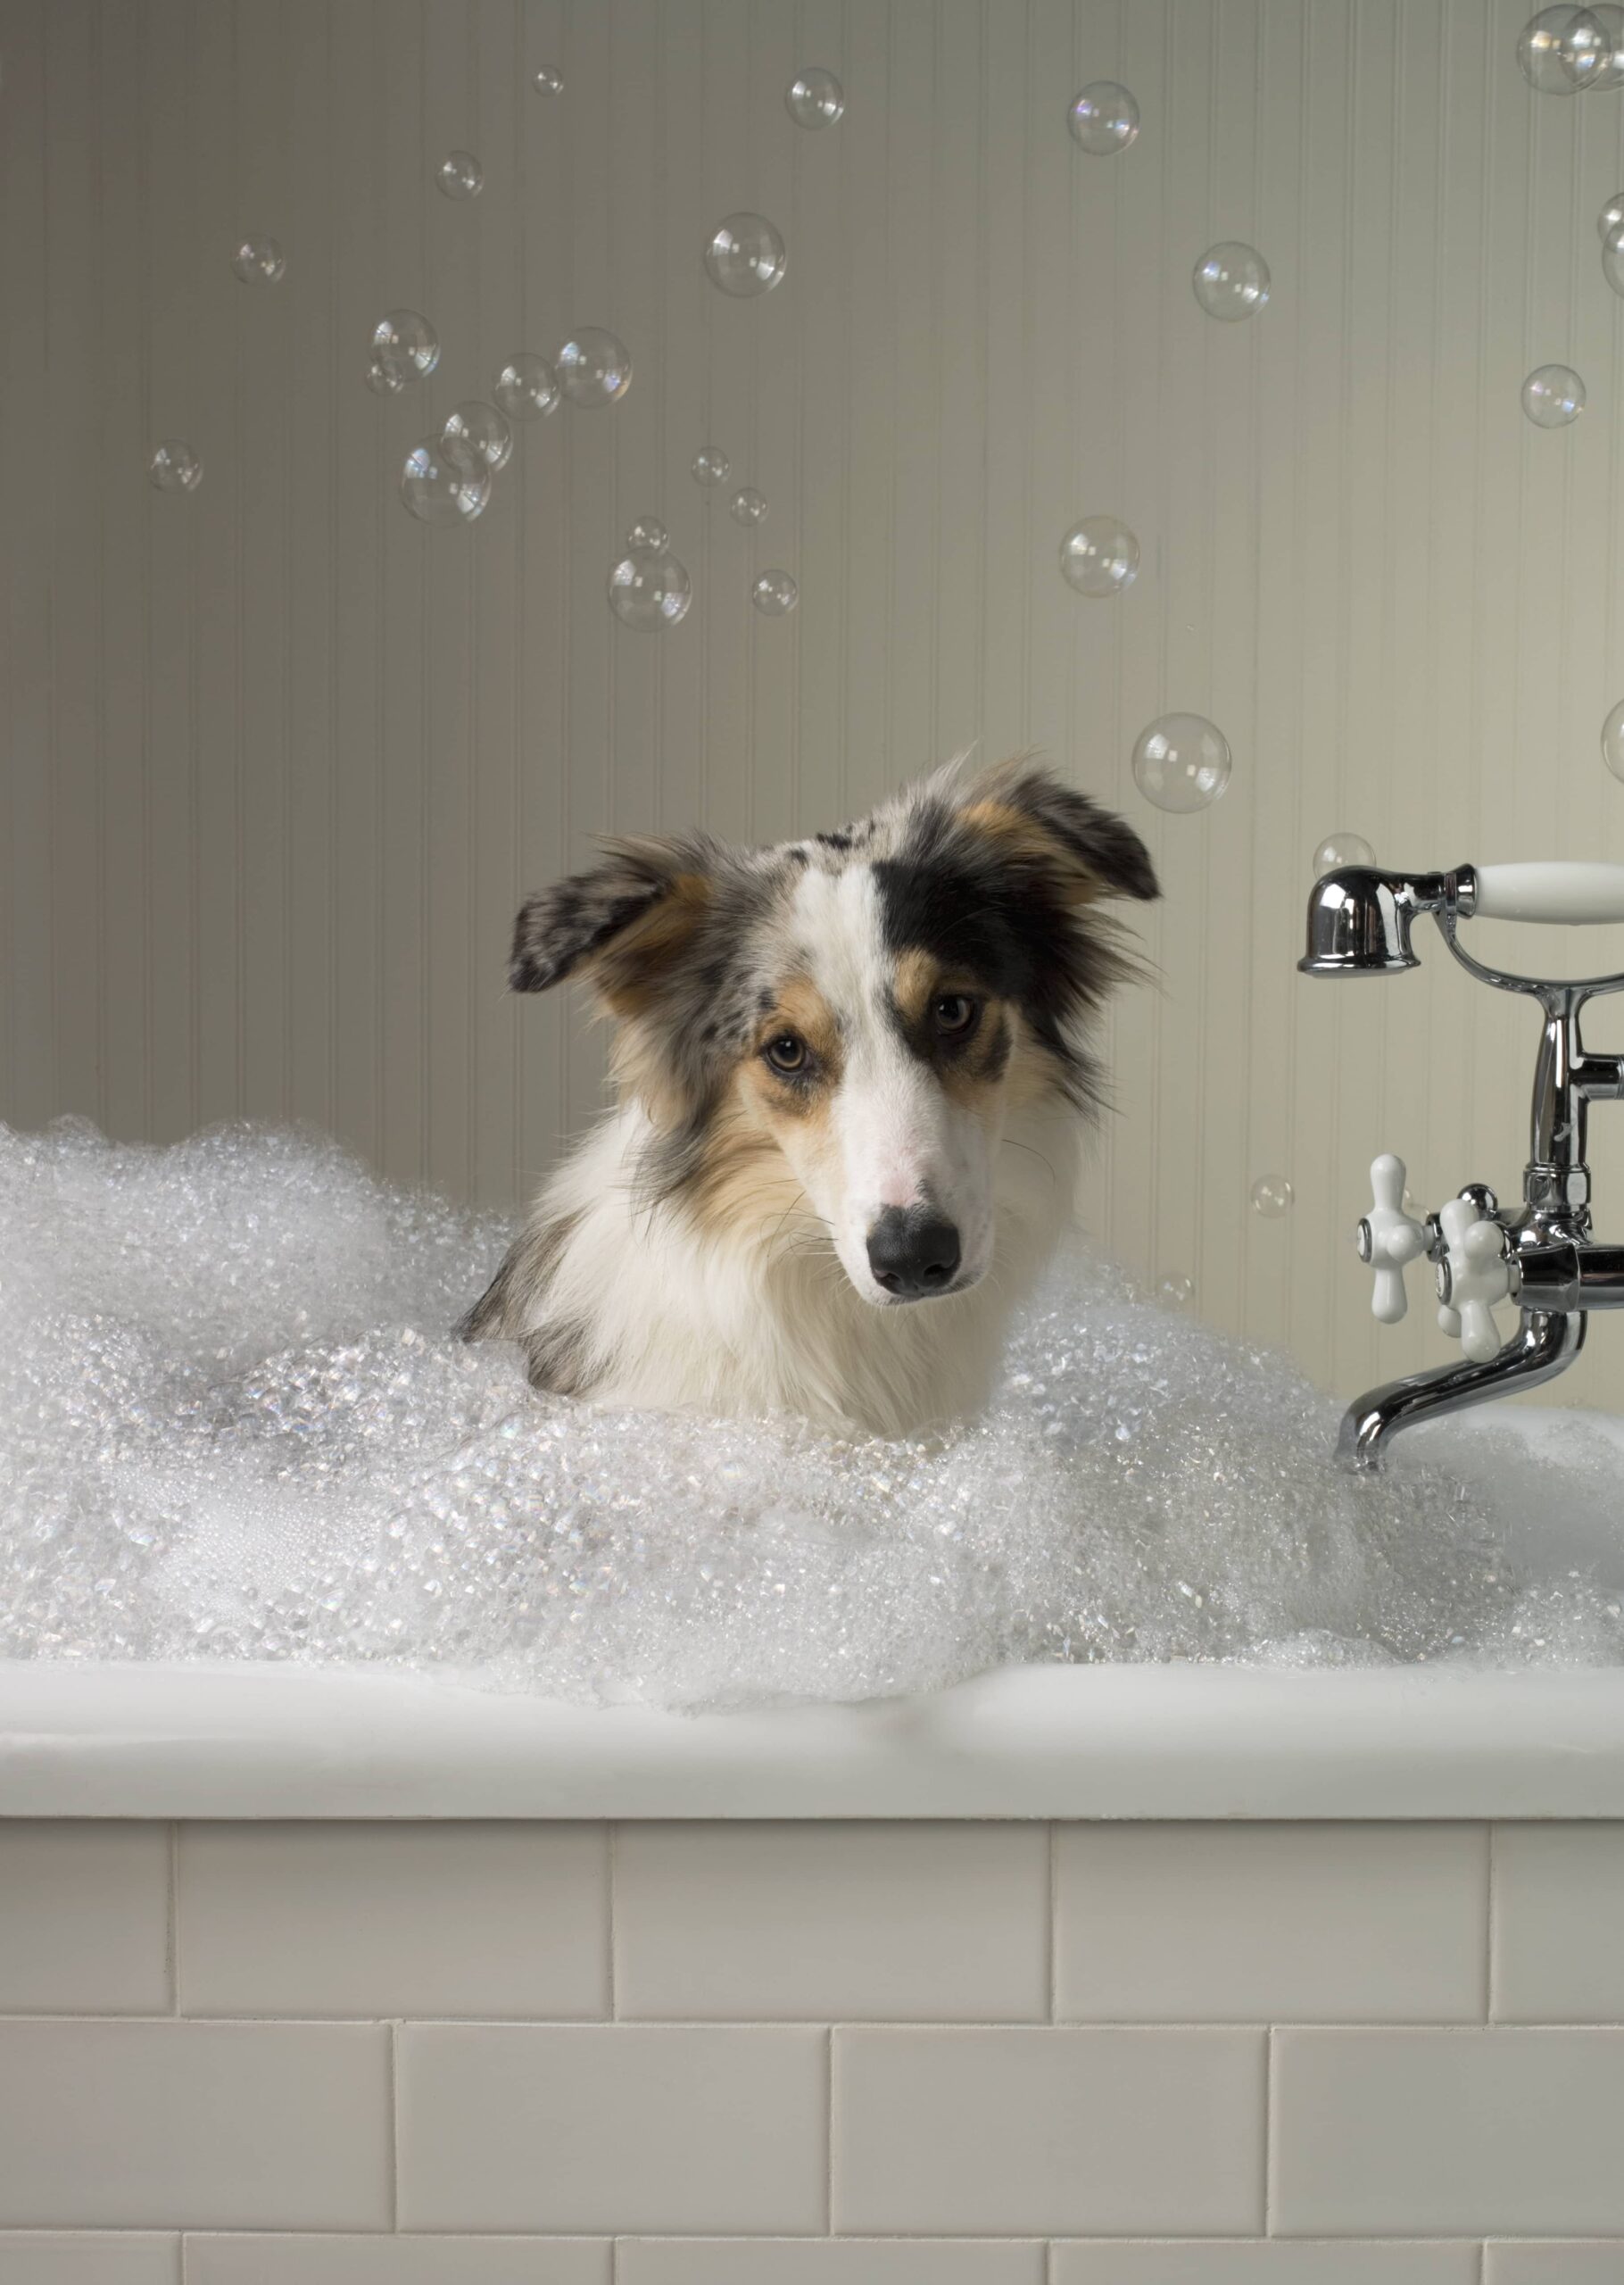 White and brown dog sitting in bathtub surrounded by bubbles 